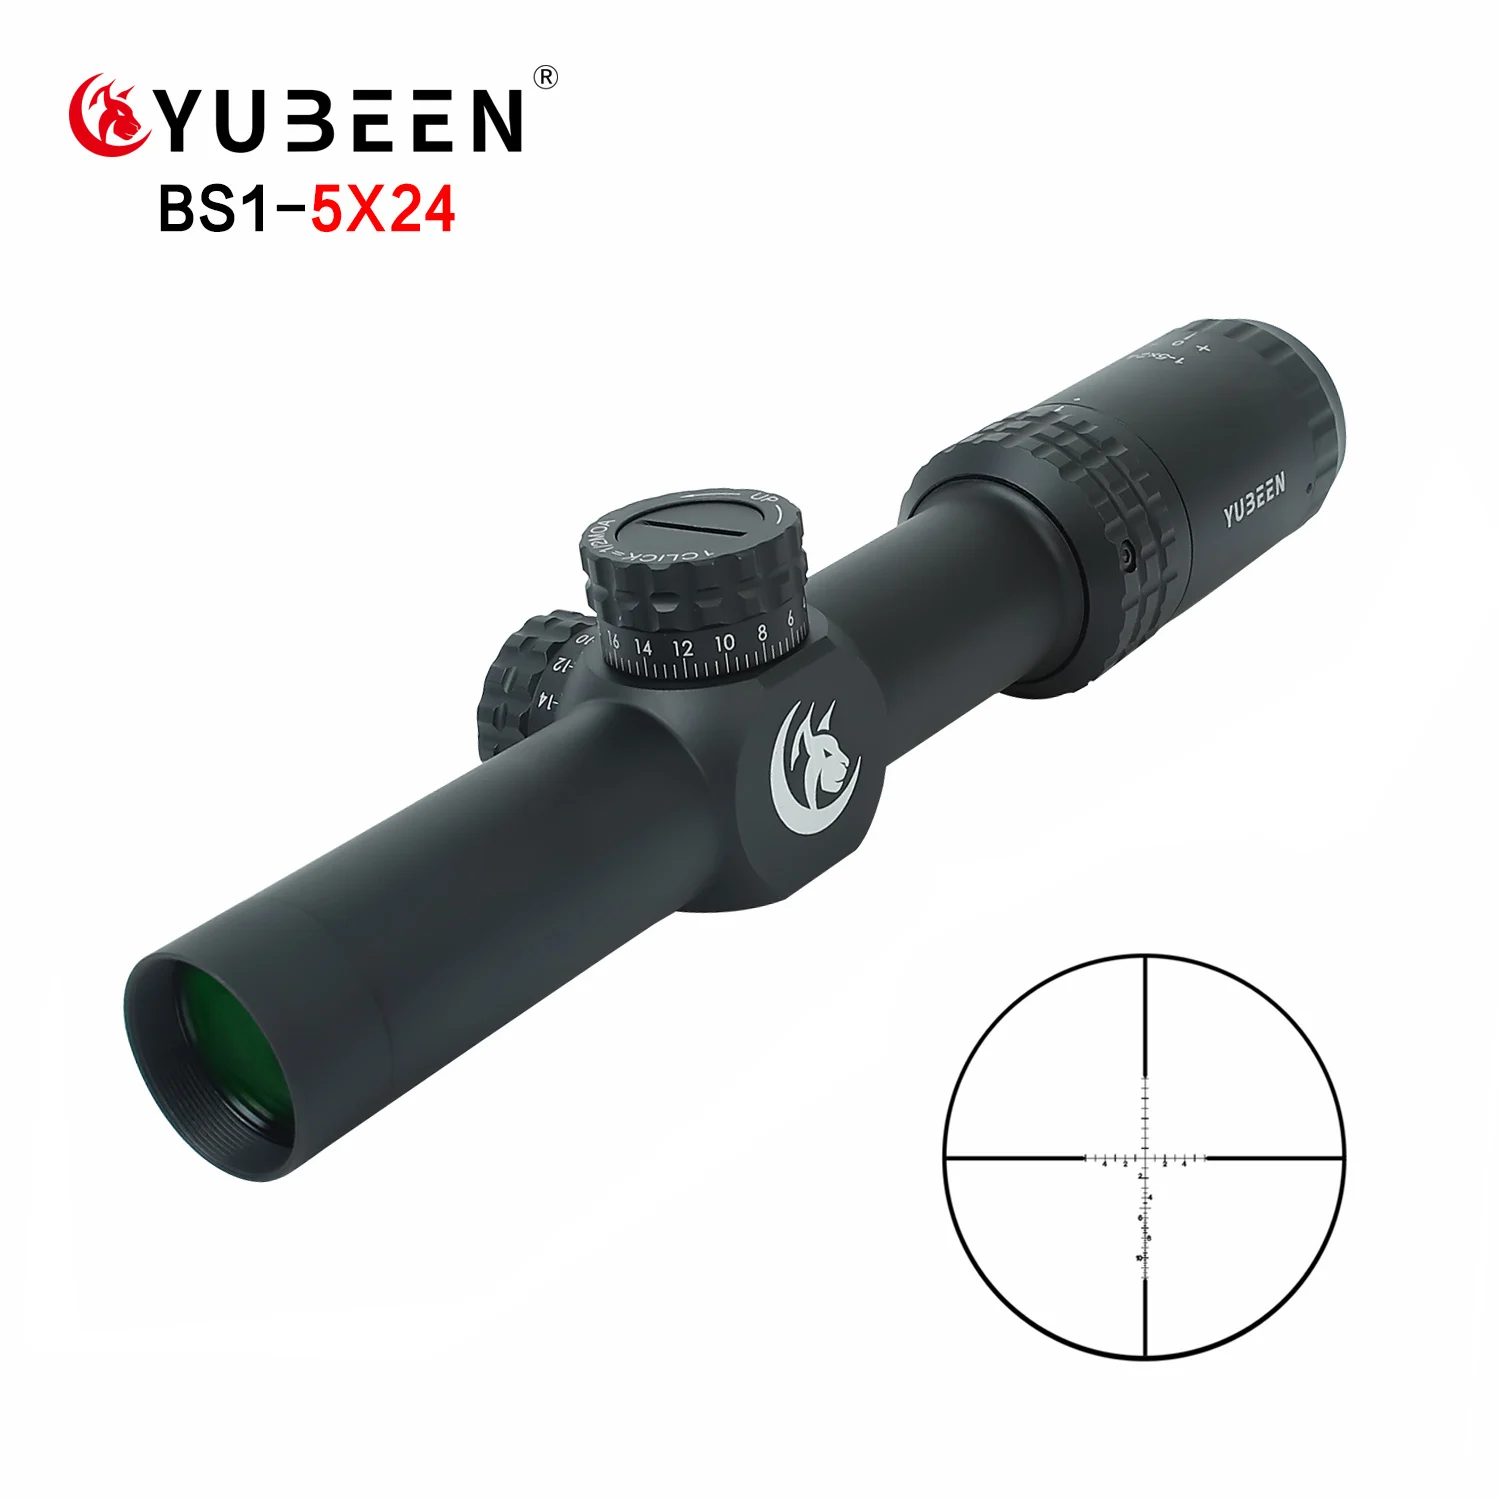 YUBEEN 1-5X24 Hunting Thin Edge Riflescopes Glass Etched Reticle Turrets Lock Compact Shooting Scope